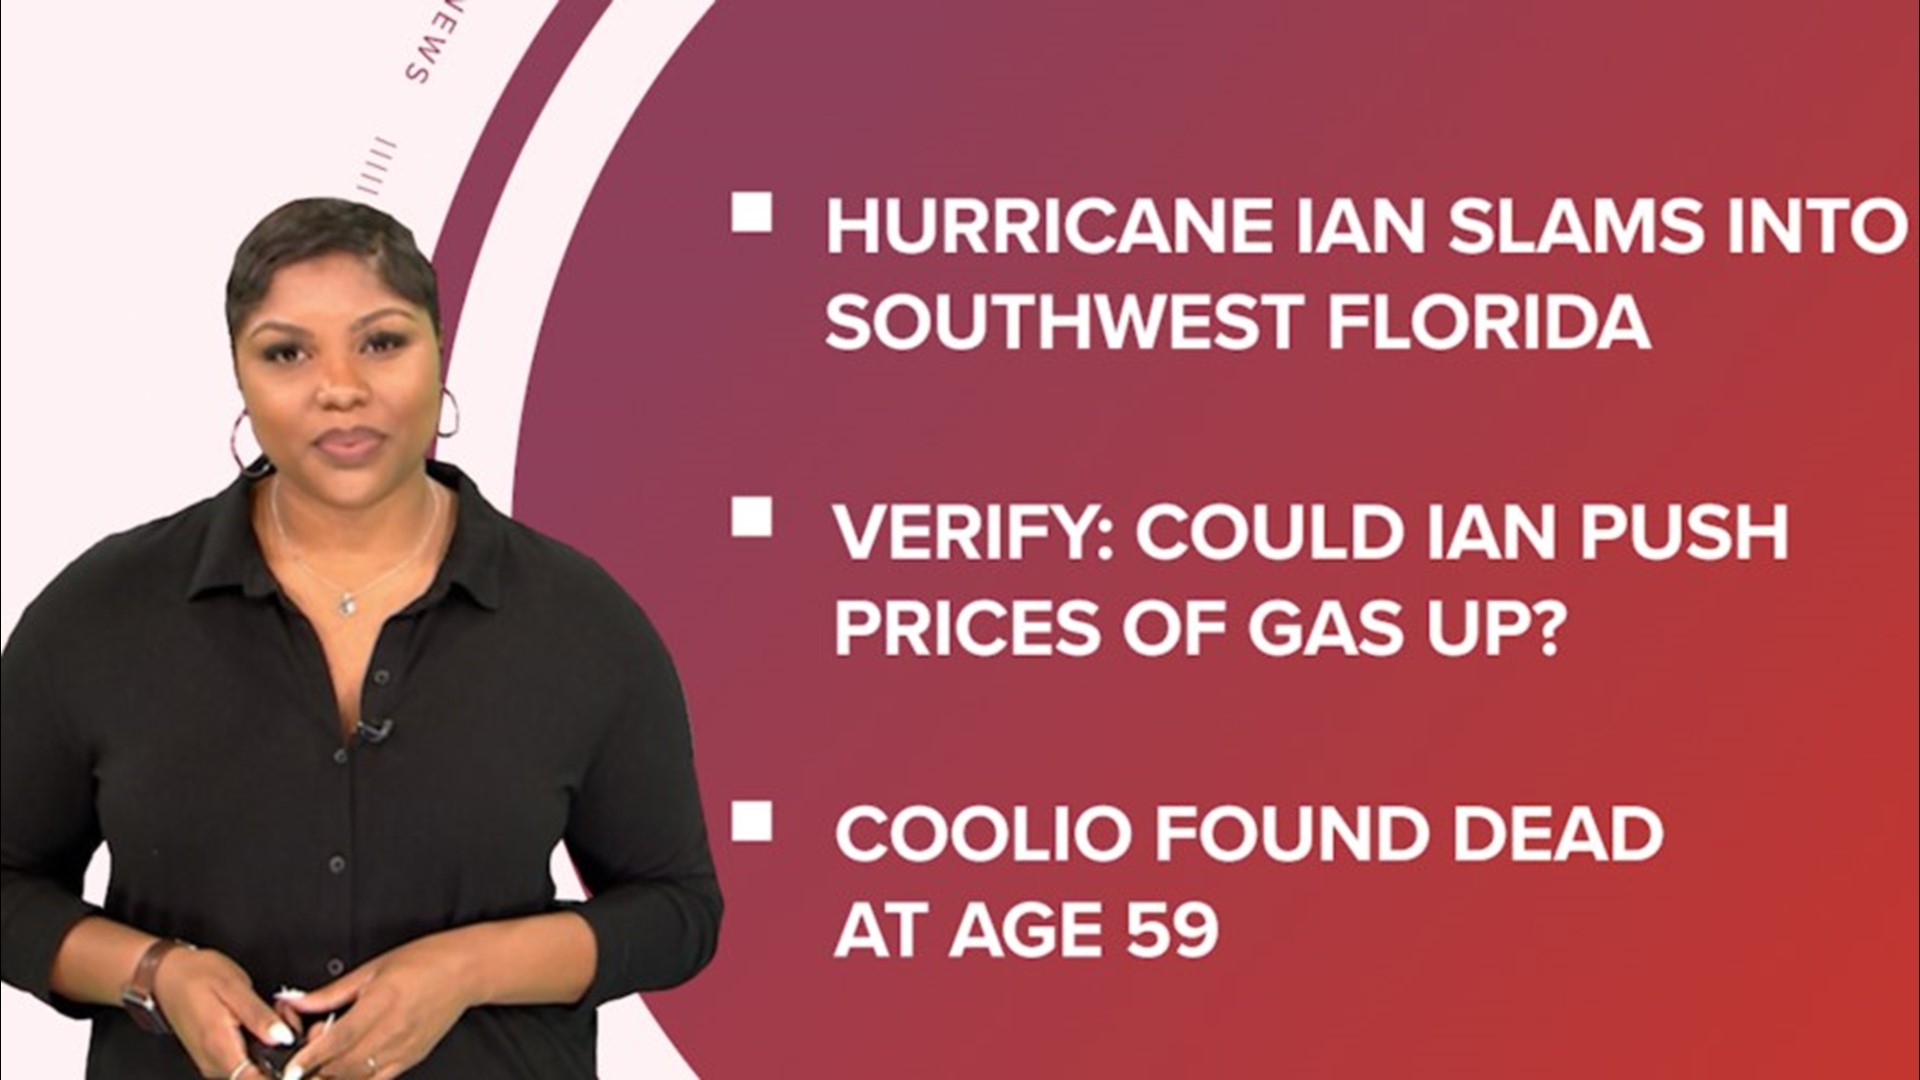 A look at what is happening in the news from the latest on damage from Hurricane Ian to Coolio found dead at age 59 and Lizzo playing a 200-year-old flute.